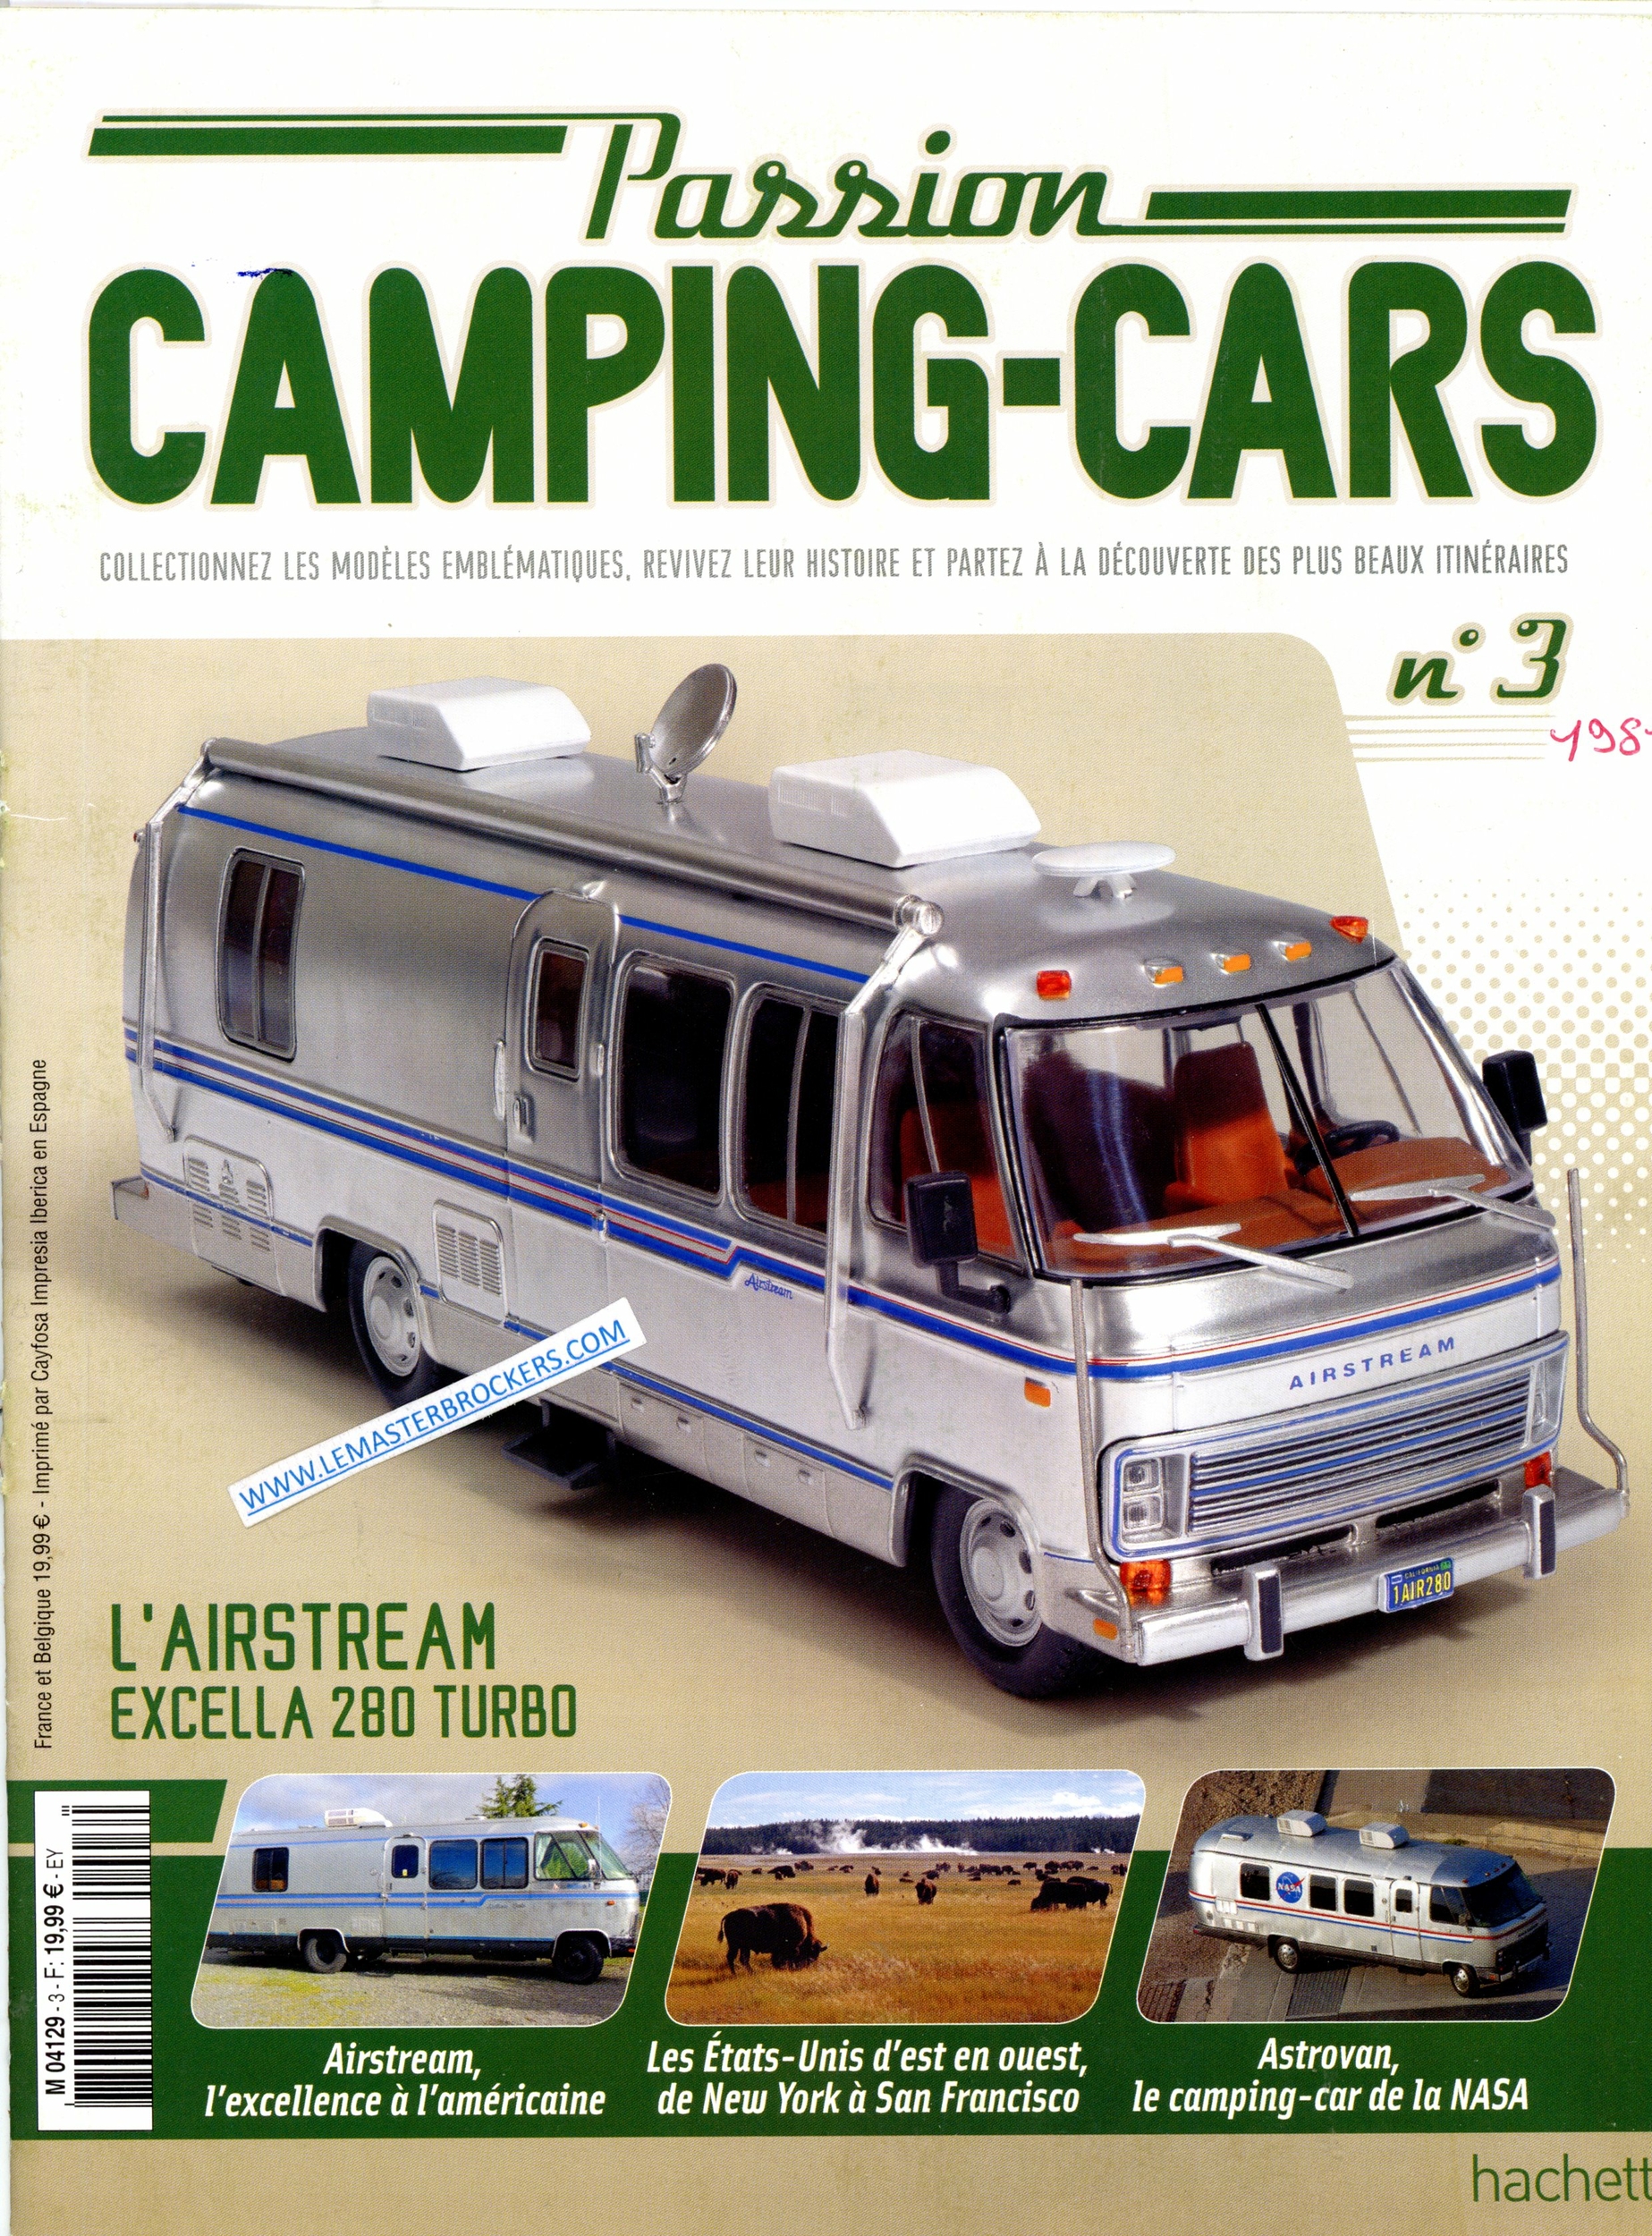 AIRSTREAM EXCELLA 280 TURBO 1981 PASSION CAMPING-CARS